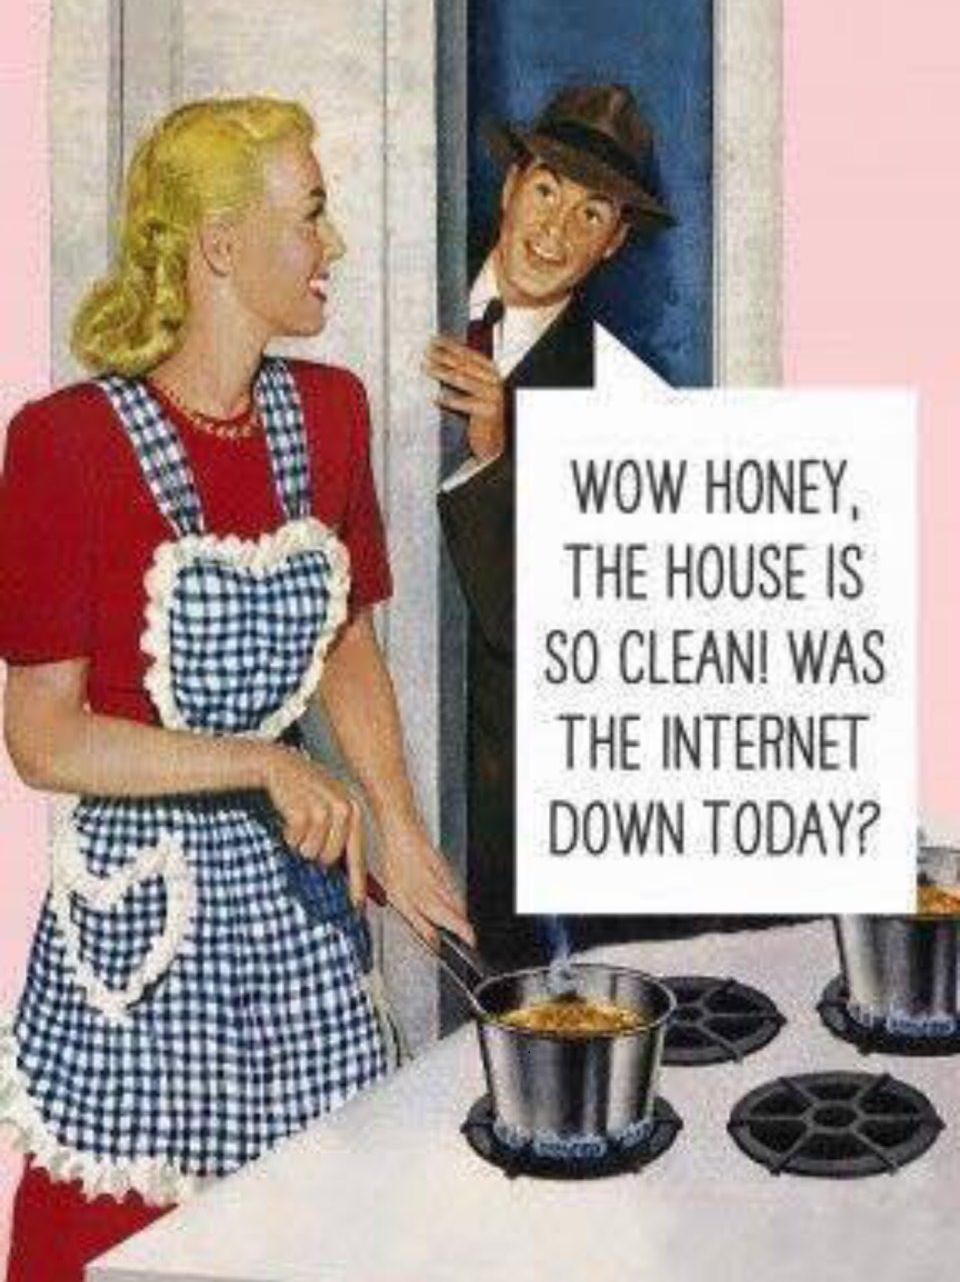 wow honey the house is so clean - Wow Honey The House Is So Clean! Was The Internet Down Today?